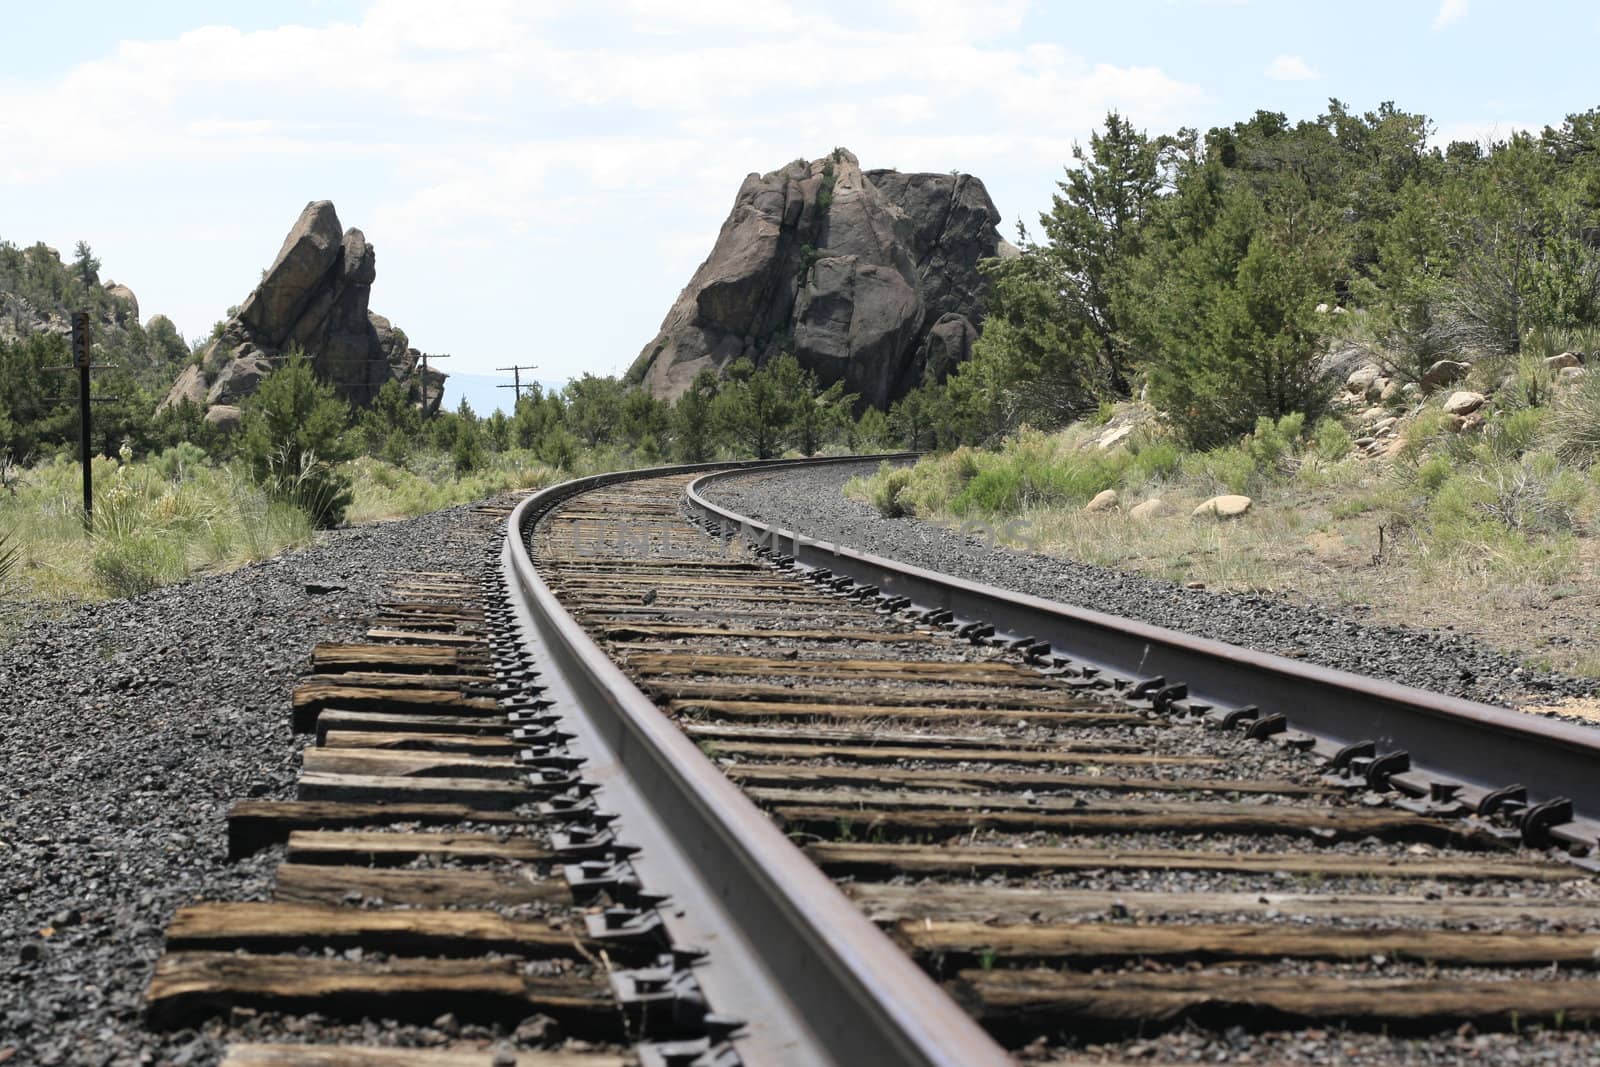 The old tracks of the Union Pacific Railroad